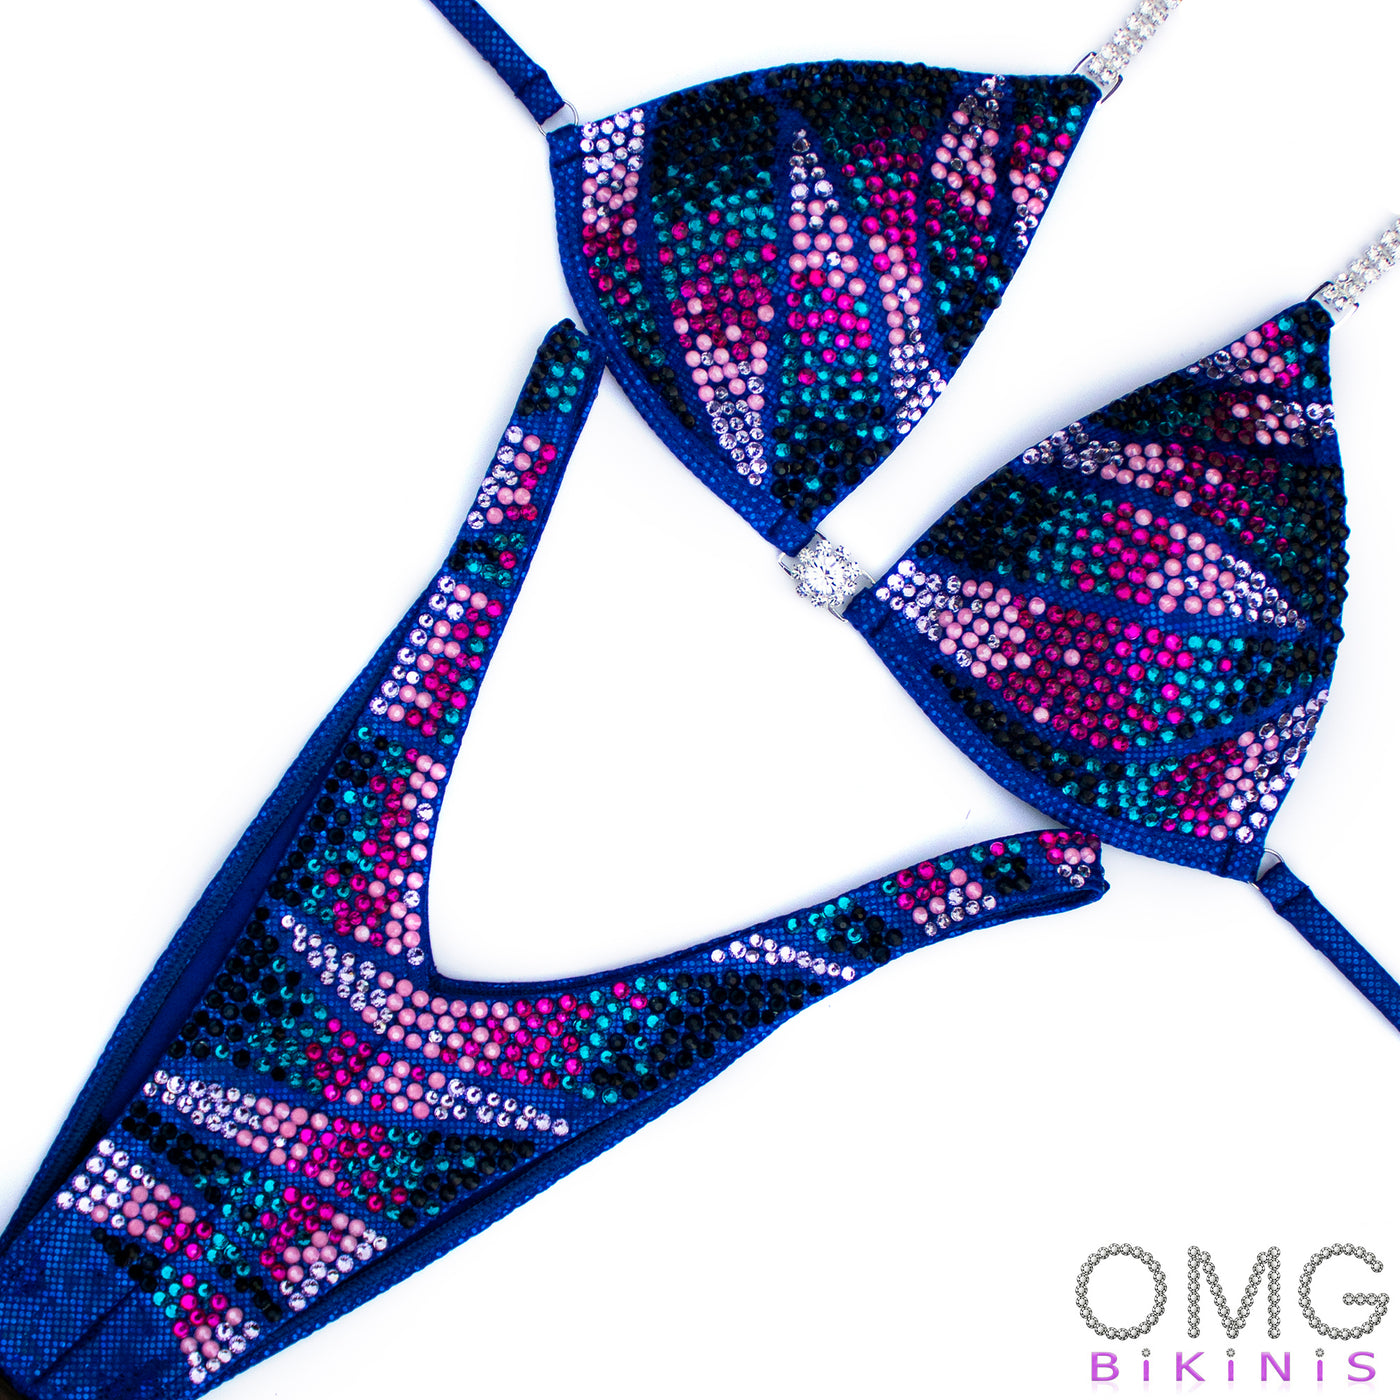 Clary Figure/WPD Competition Suit | OMG Bikinis